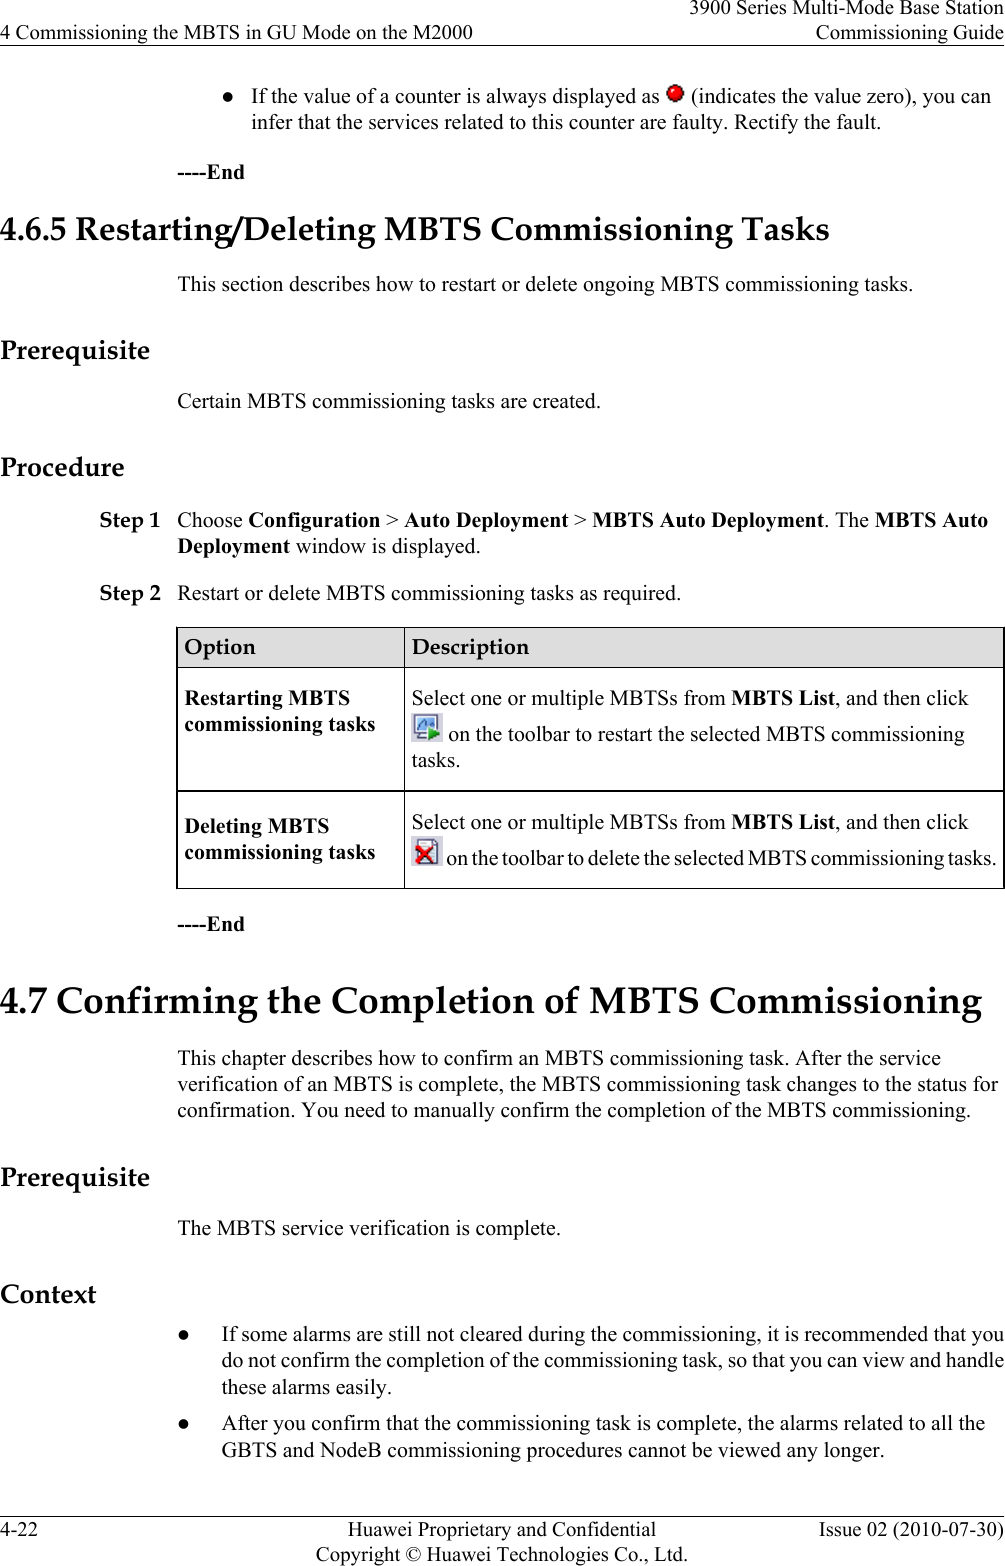 lIf the value of a counter is always displayed as   (indicates the value zero), you caninfer that the services related to this counter are faulty. Rectify the fault.----End4.6.5 Restarting/Deleting MBTS Commissioning TasksThis section describes how to restart or delete ongoing MBTS commissioning tasks.PrerequisiteCertain MBTS commissioning tasks are created.ProcedureStep 1 Choose Configuration &gt; Auto Deployment &gt; MBTS Auto Deployment. The MBTS AutoDeployment window is displayed.Step 2 Restart or delete MBTS commissioning tasks as required.Option DescriptionRestarting MBTScommissioning tasksSelect one or multiple MBTSs from MBTS List, and then click on the toolbar to restart the selected MBTS commissioningtasks.Deleting MBTScommissioning tasksSelect one or multiple MBTSs from MBTS List, and then click on the toolbar to delete the selected MBTS commissioning tasks.----End4.7 Confirming the Completion of MBTS CommissioningThis chapter describes how to confirm an MBTS commissioning task. After the serviceverification of an MBTS is complete, the MBTS commissioning task changes to the status forconfirmation. You need to manually confirm the completion of the MBTS commissioning.PrerequisiteThe MBTS service verification is complete.ContextlIf some alarms are still not cleared during the commissioning, it is recommended that youdo not confirm the completion of the commissioning task, so that you can view and handlethese alarms easily.lAfter you confirm that the commissioning task is complete, the alarms related to all theGBTS and NodeB commissioning procedures cannot be viewed any longer.4 Commissioning the MBTS in GU Mode on the M20003900 Series Multi-Mode Base StationCommissioning Guide4-22 Huawei Proprietary and ConfidentialCopyright © Huawei Technologies Co., Ltd.Issue 02 (2010-07-30)